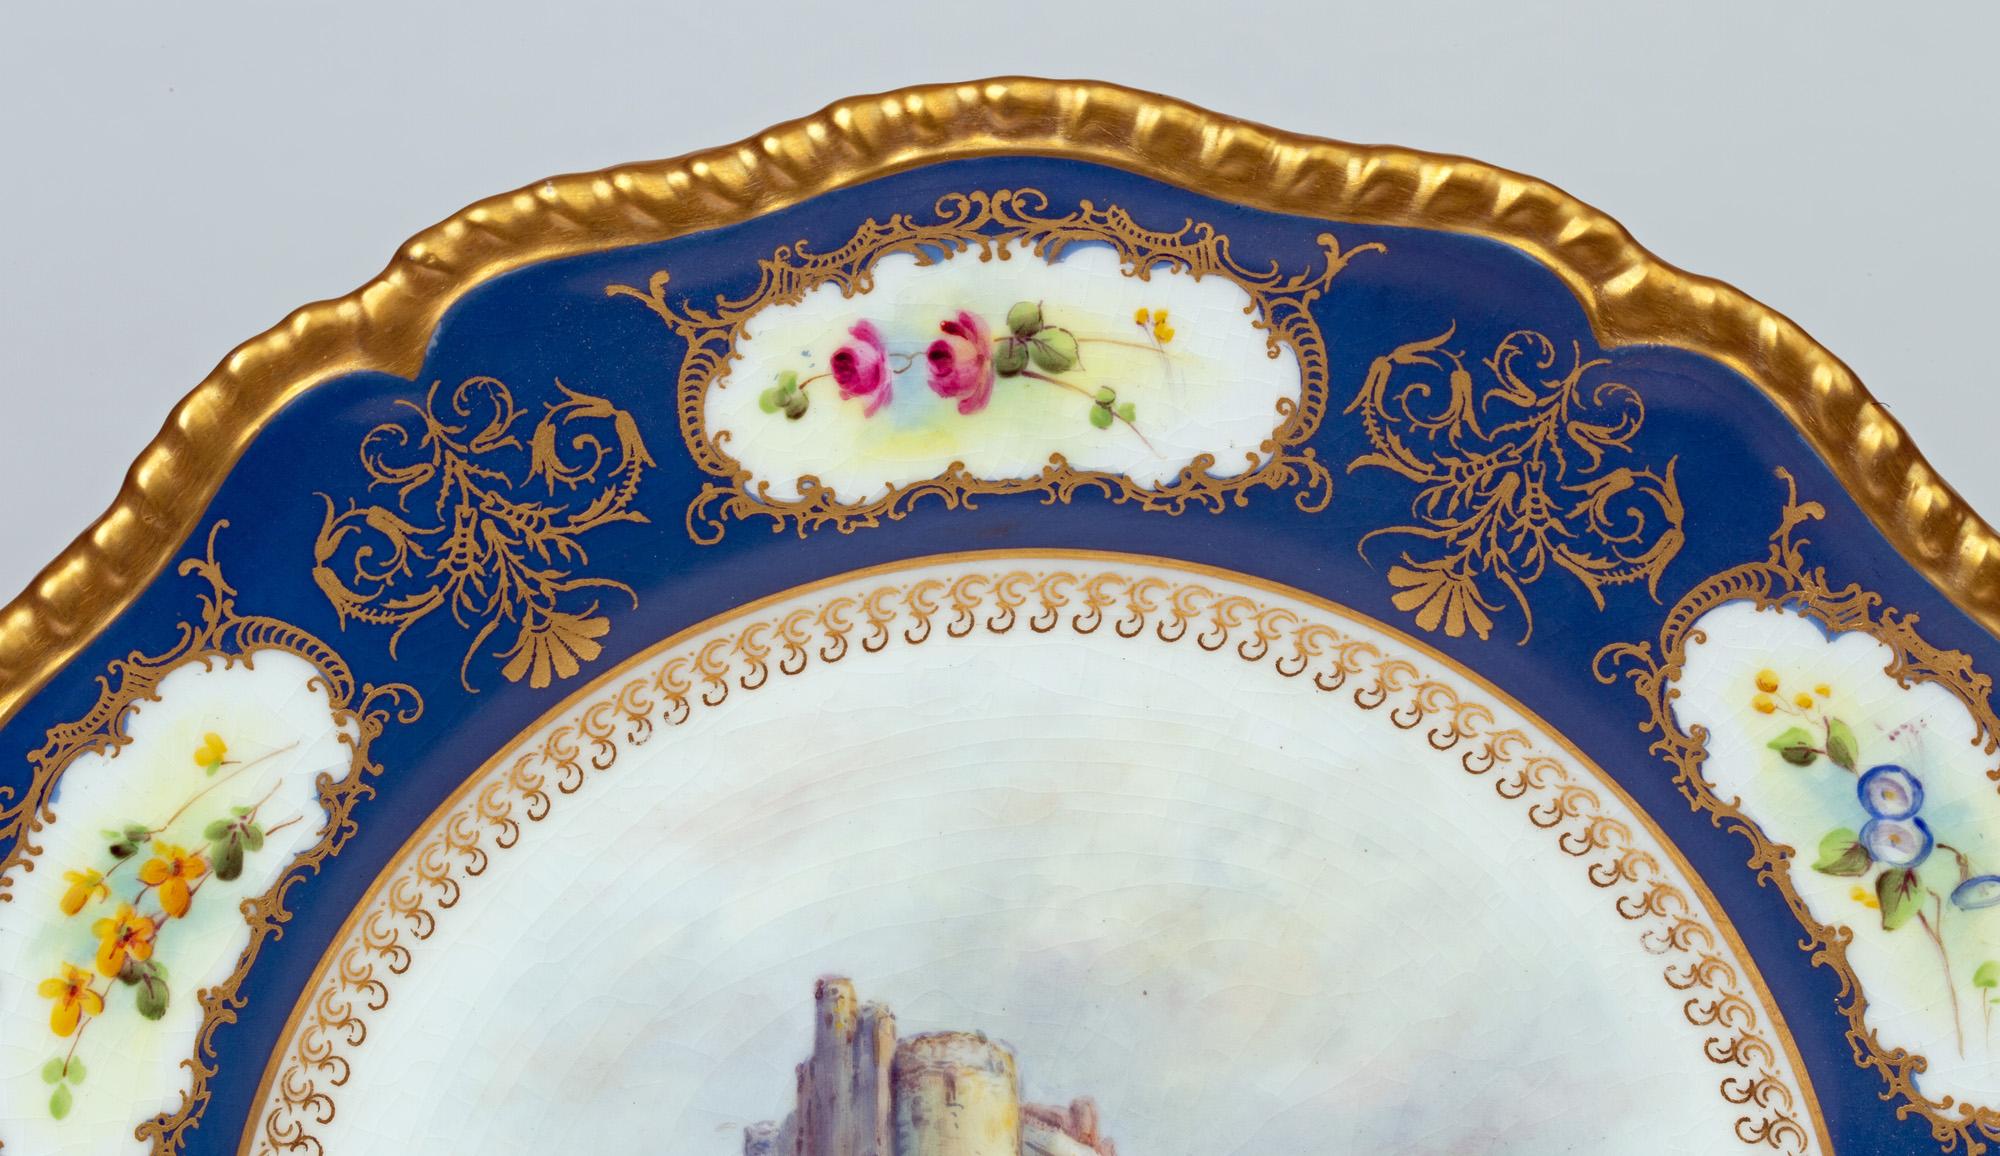 A stunning Royal Worcester porcelain cabinet plate hand painted with a scene titled Castle of Doune by James Stinton and dated 1933. The plate has a central scene of the castle set in a landscape within a decorative border with small floral